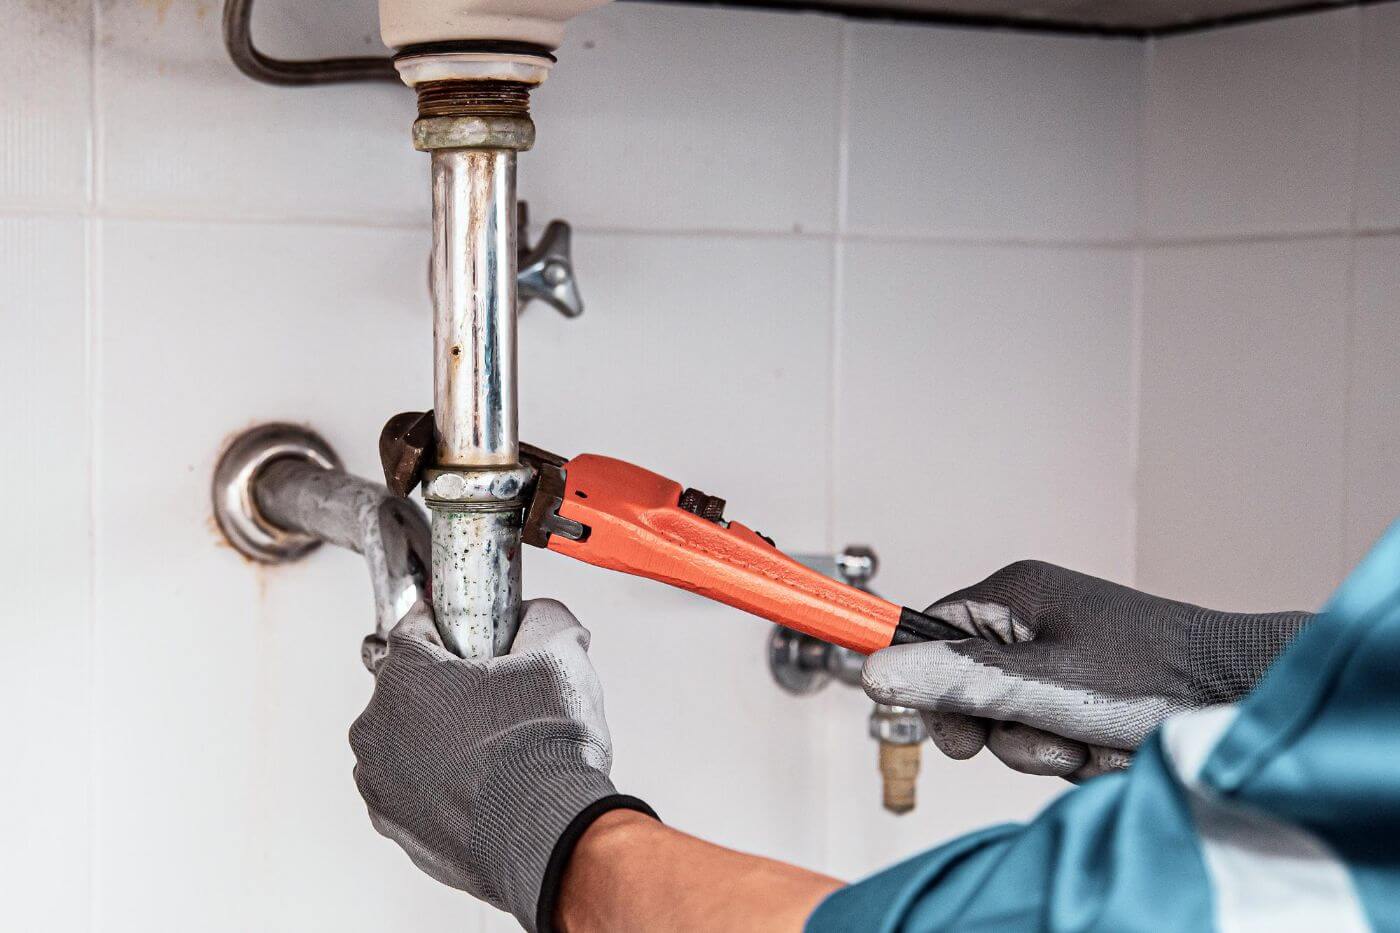 Plumber using a wrench to repair water pipe under the sink